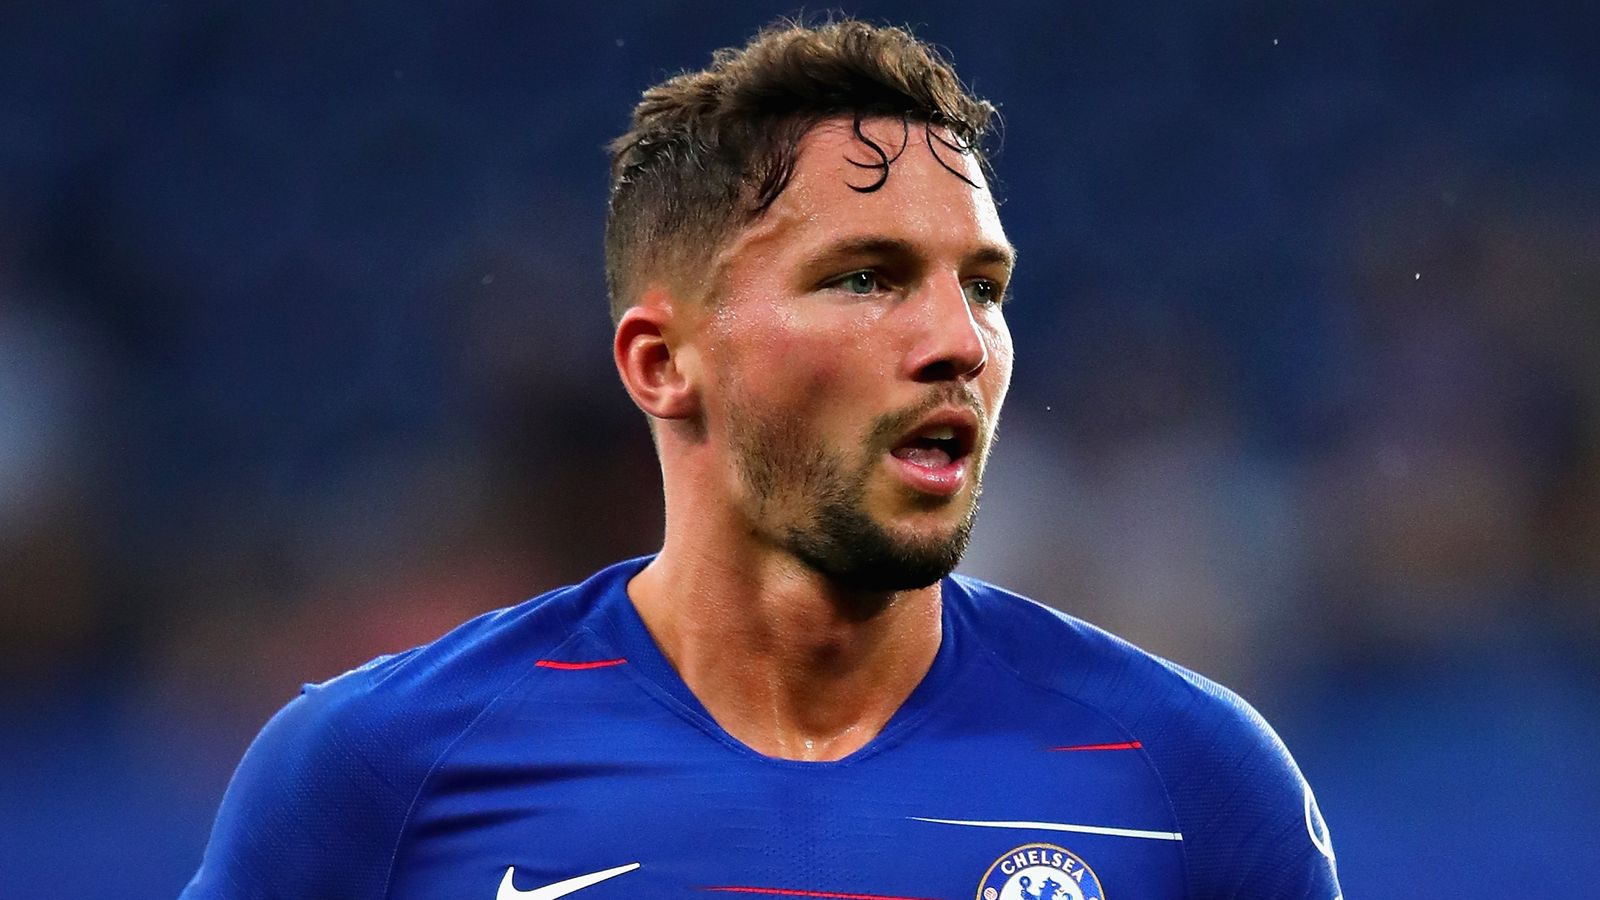 Danny Drinkwater on his Chelsea nightmare: 'I wasted some of my best years'